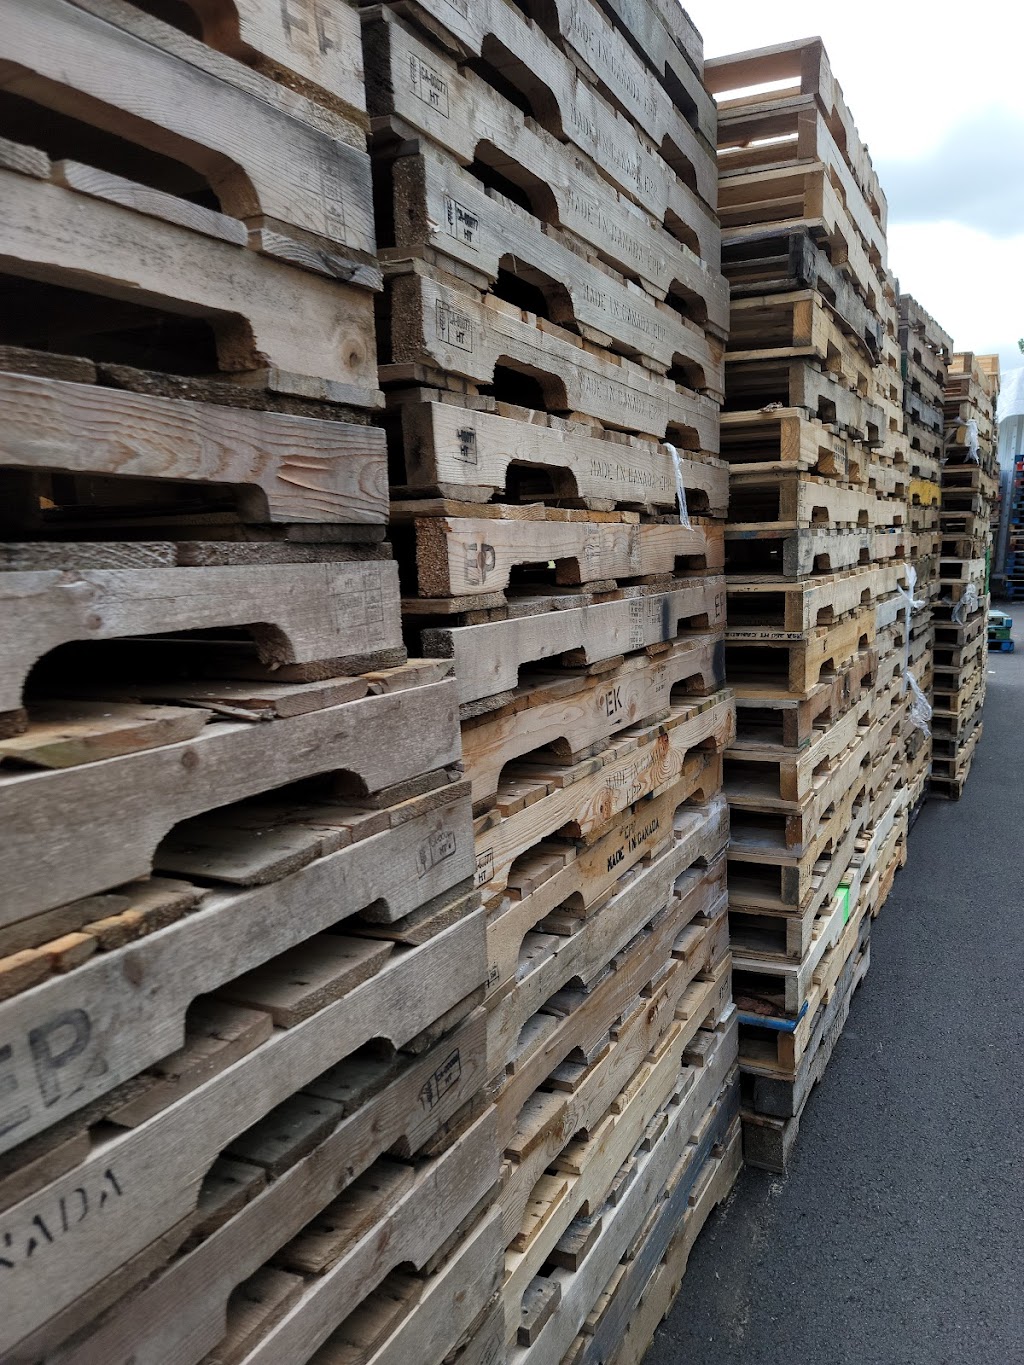 All Pallet Supplies inc | 7181 264 St, Langley Twp, BC V4W 1P8, Canada | Phone: (604) 613-4062